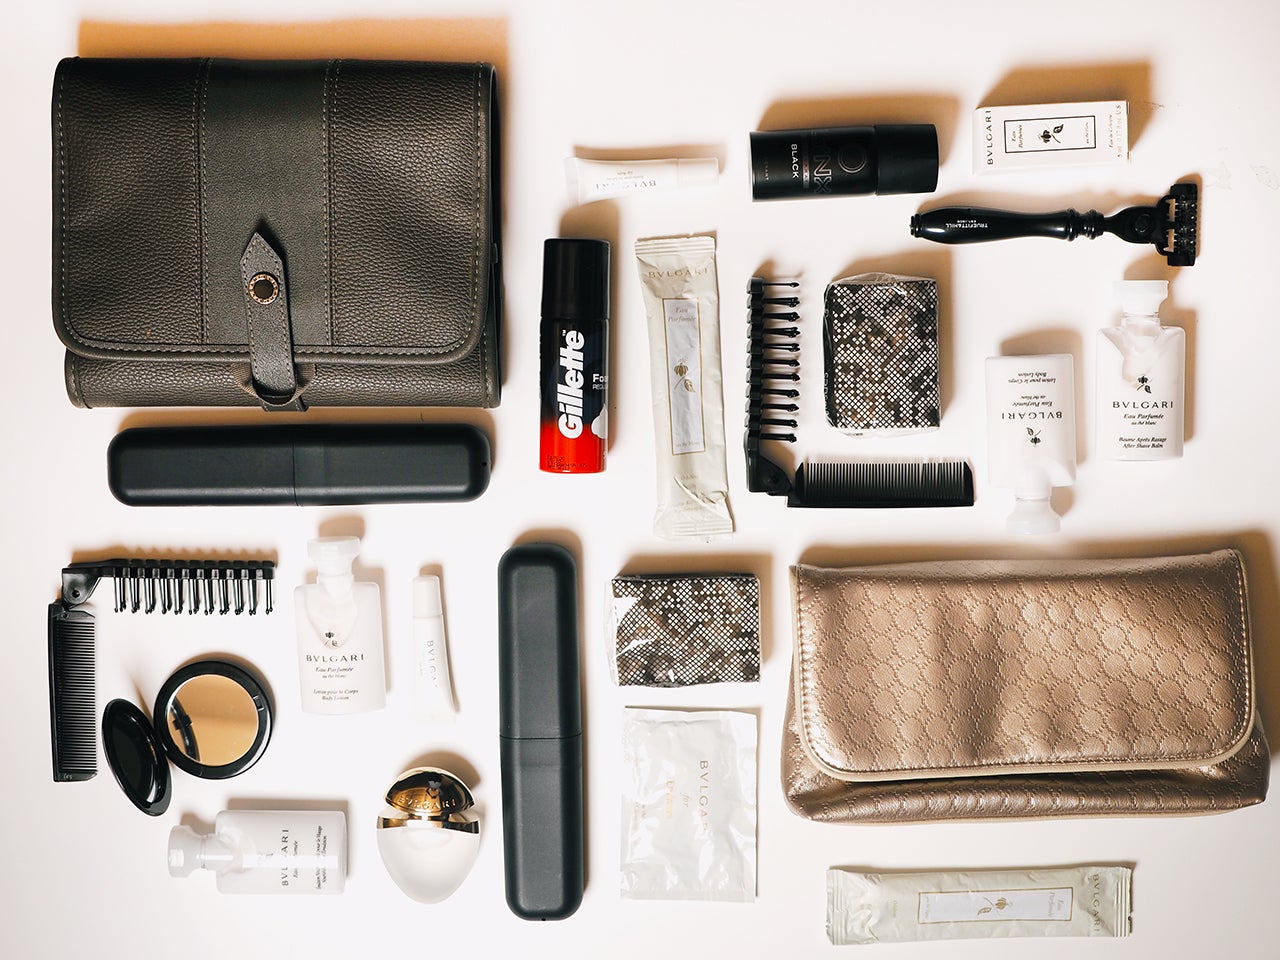 Amenity Kit Review: Emirates Airline First-Class - The Points Guy